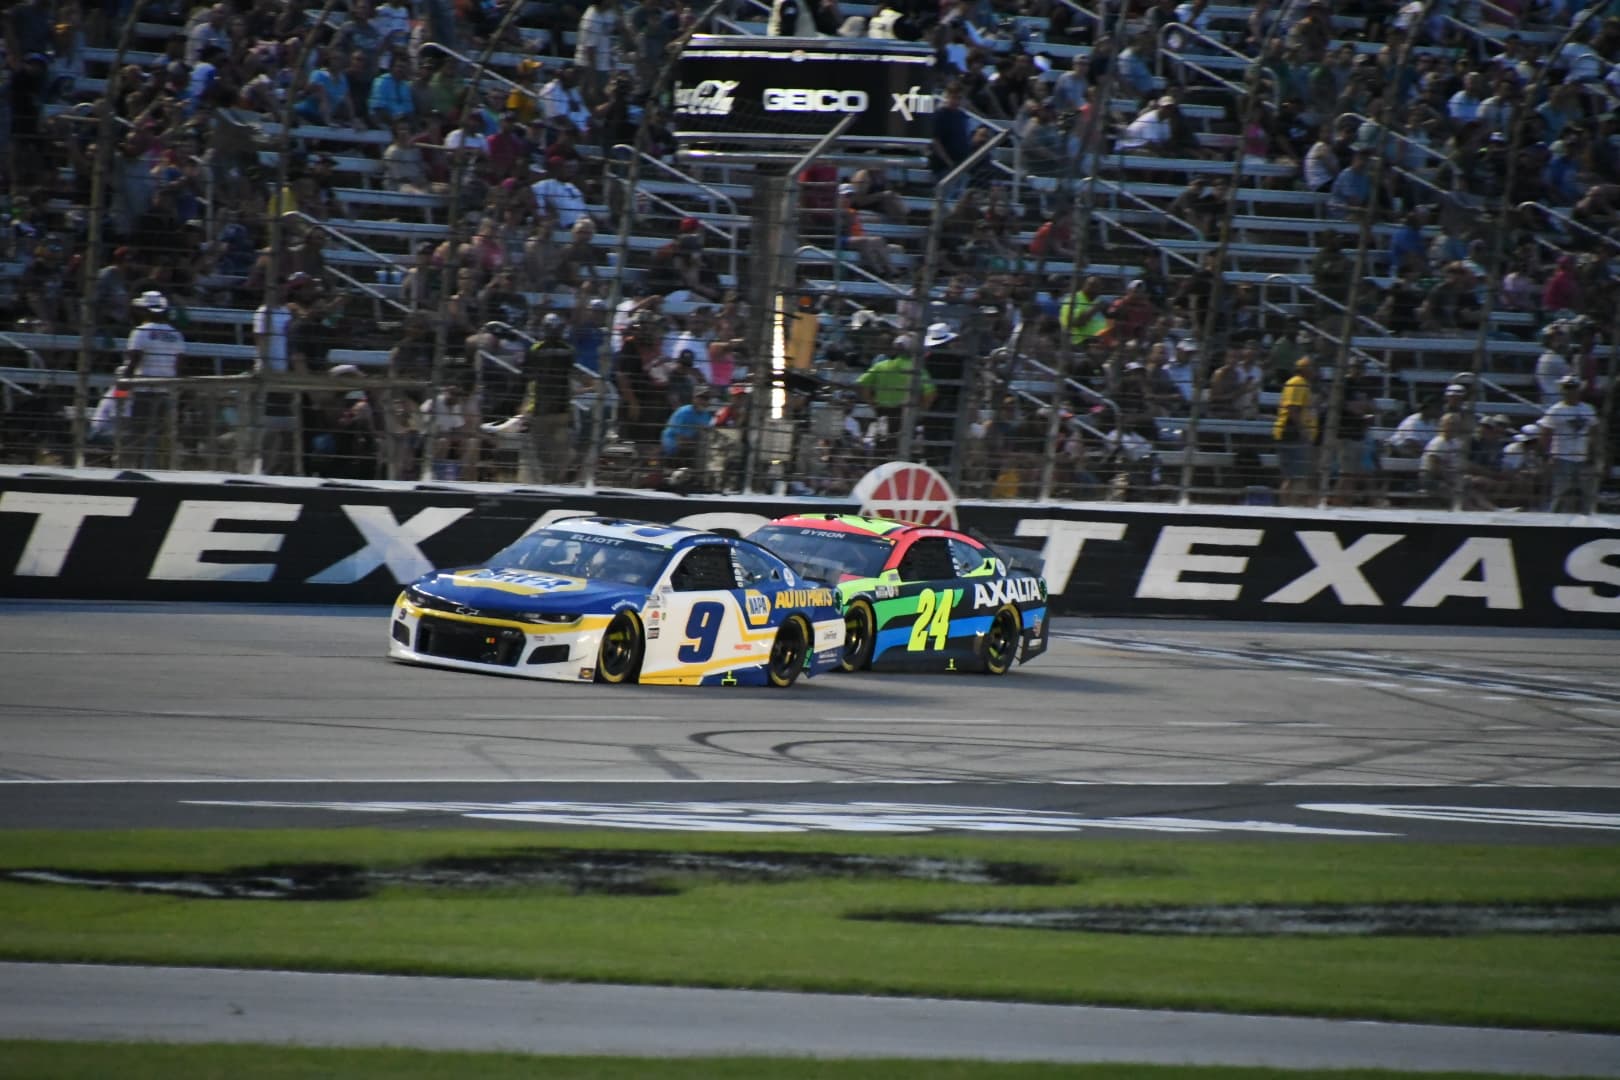 Indeed, Chase Elliott and his No. 9 team seem as strong as last year's title run. (Photo: Sean Folsom | The Podium Finish)